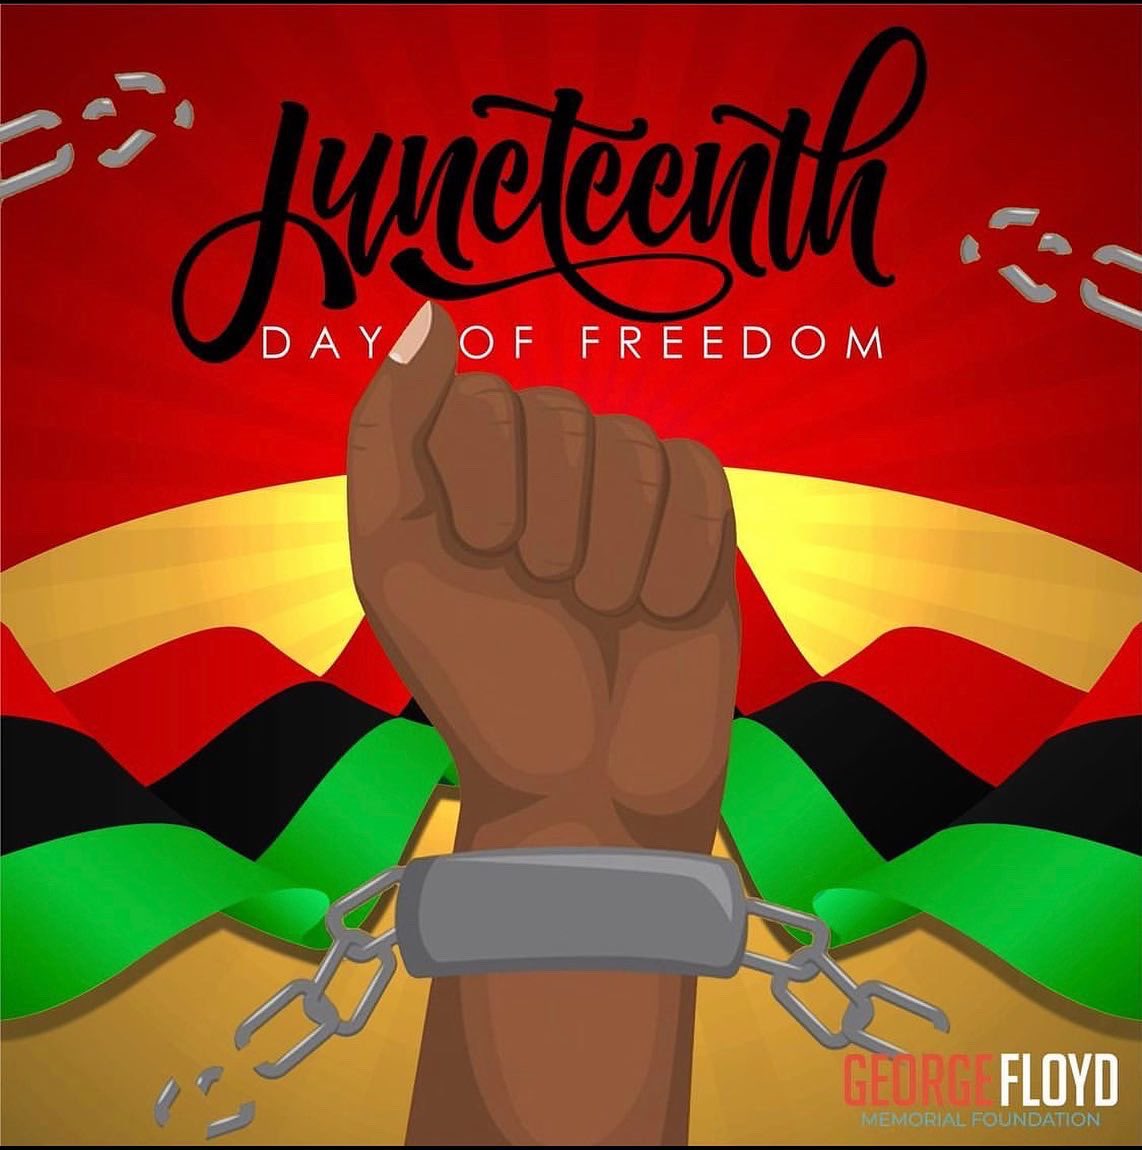 Today we rejoice, reflect, and celebrate our achievements throughout history! #HappyJuneteenth